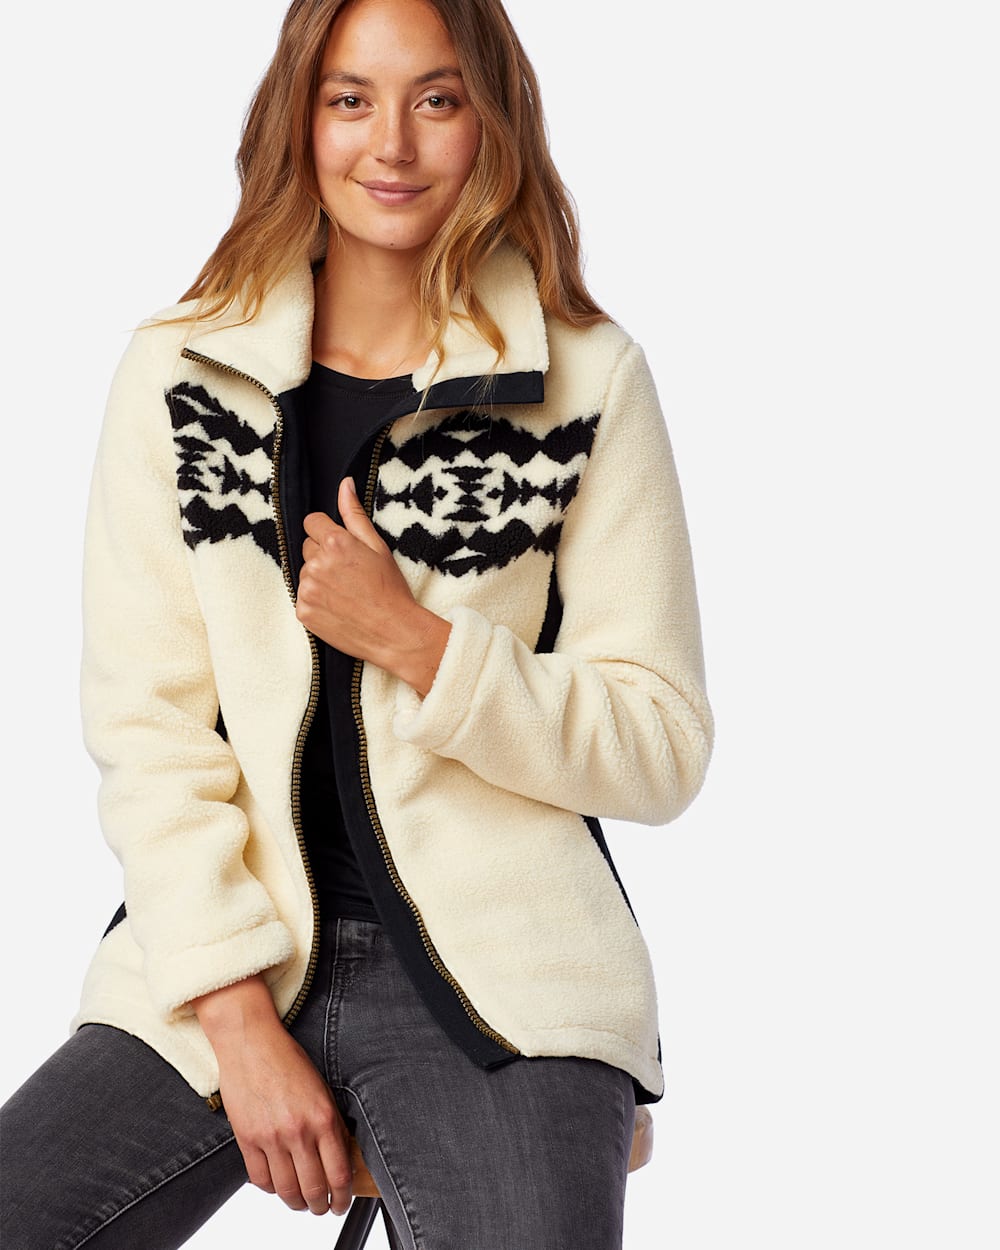 ALTERNATE VIEW OF WOMEN'S BROOKE SONORA SHERPA JACKET IN IVORY SONORA image number 5